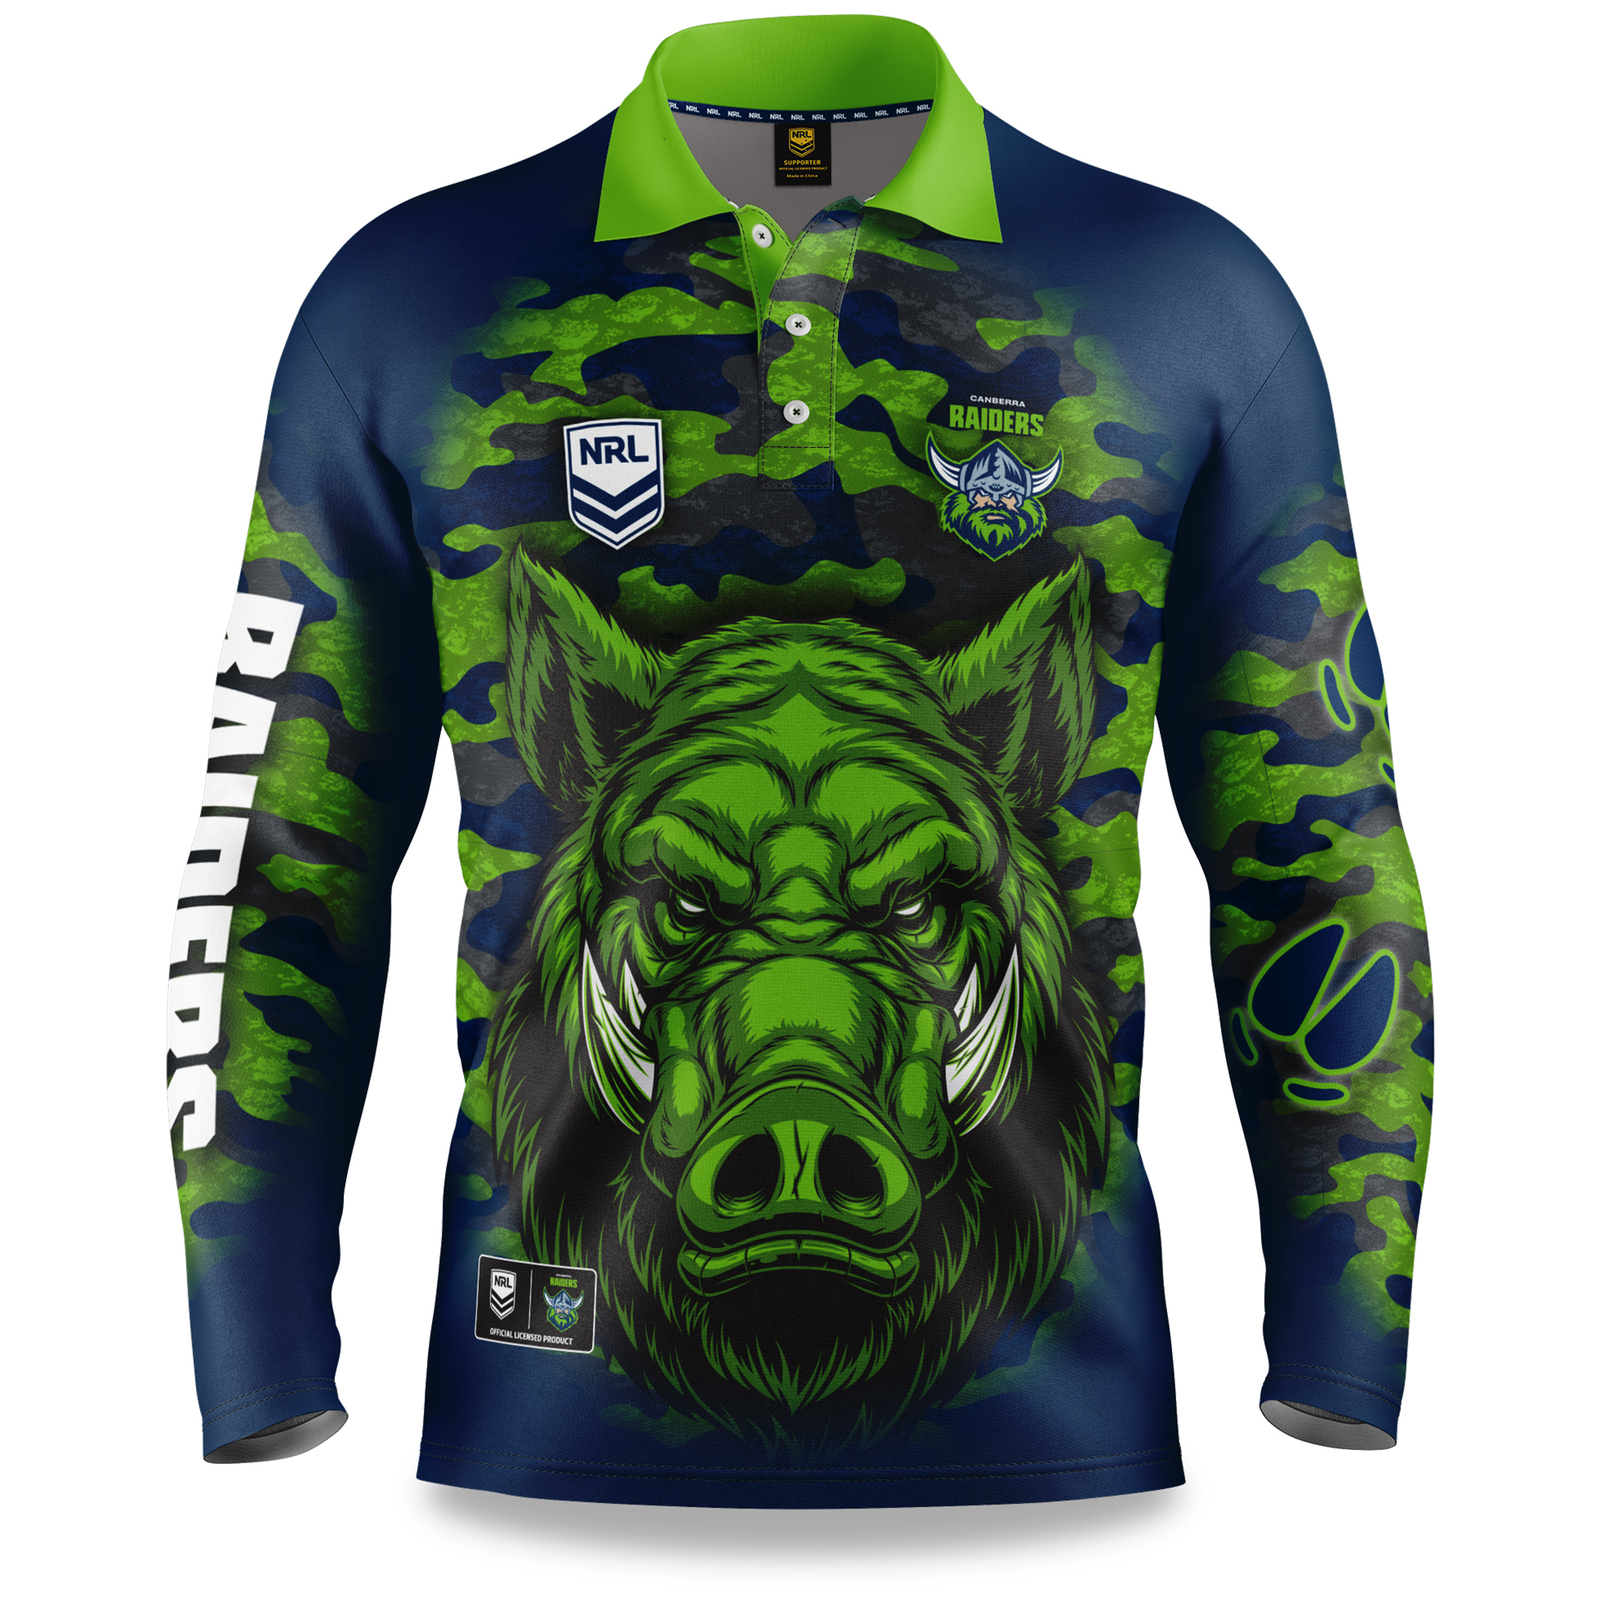 Canberra Raiders 2021 NRL Players Run Out Tee Shirt Sizes S-5XL! 